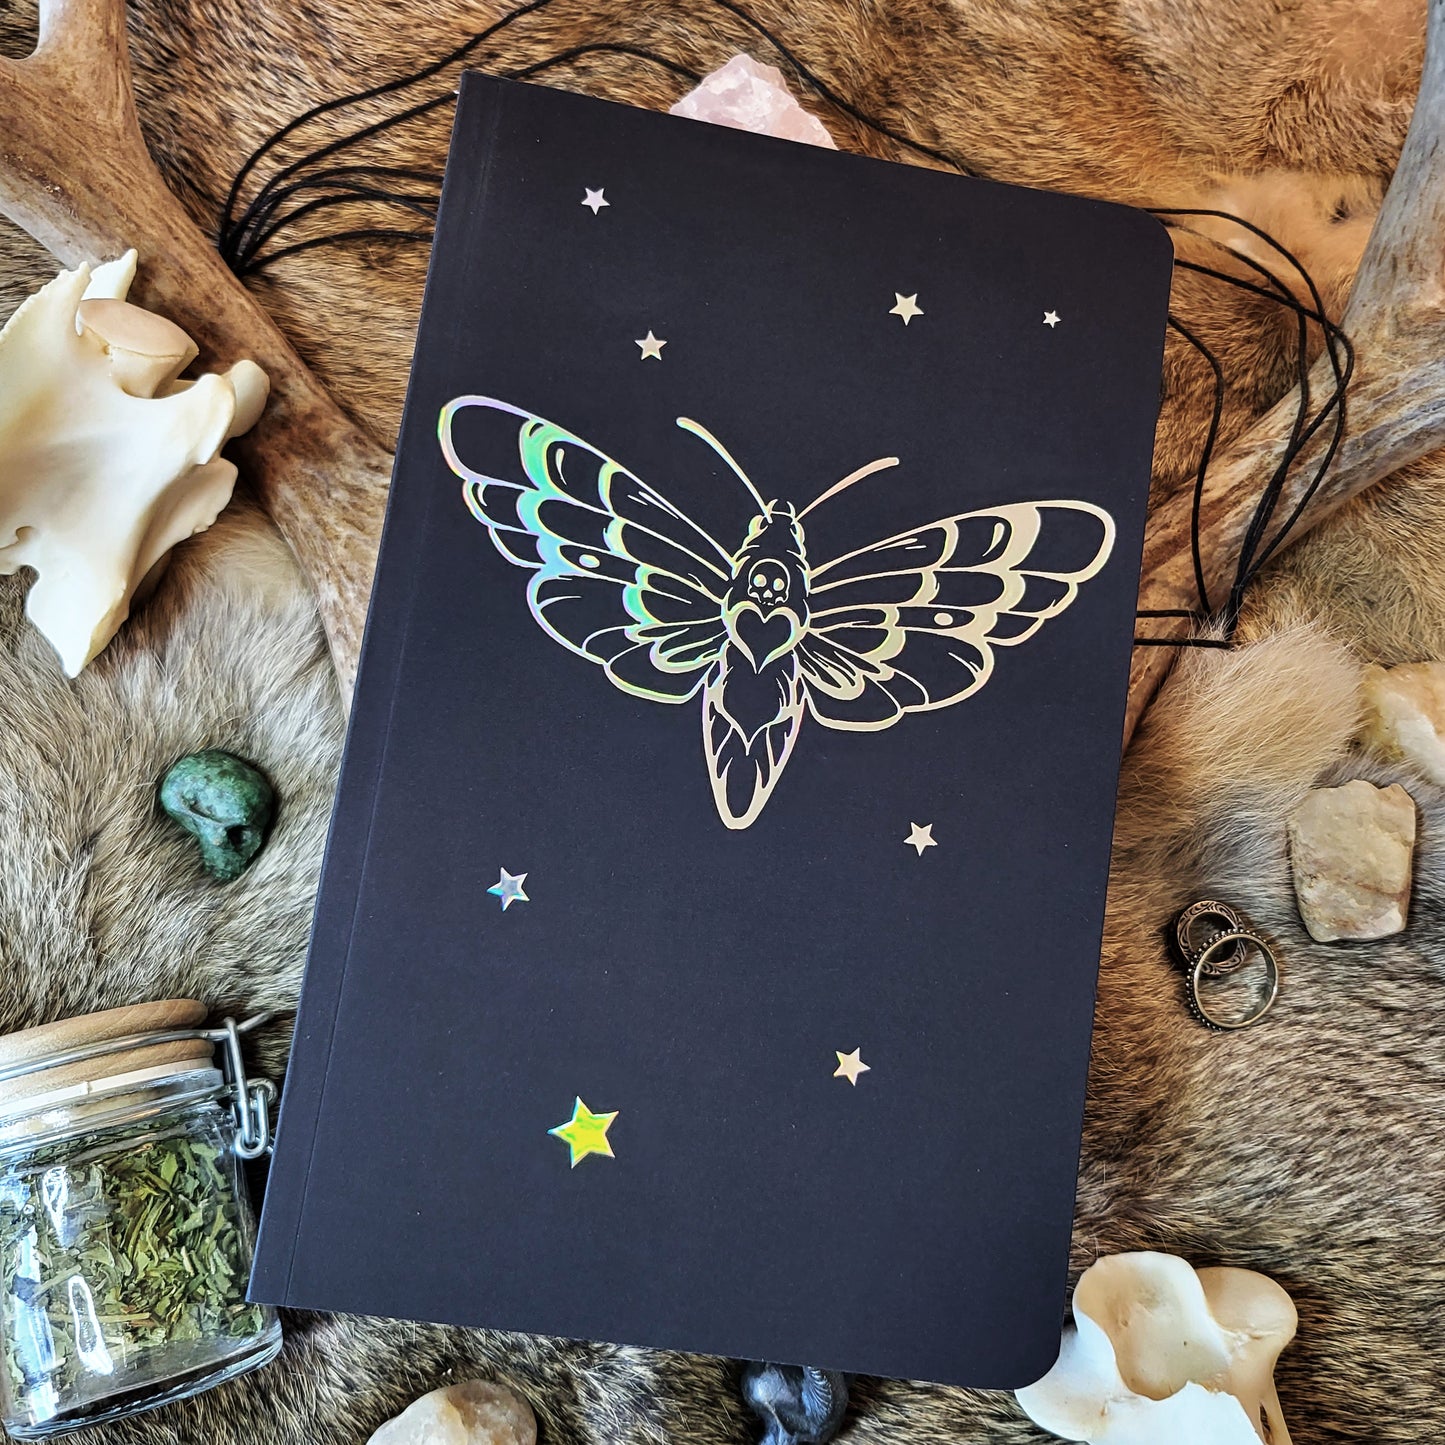 Death's Head Hawkmoth Iridescent Foil Stamped Lay Flat Journal/Sketchbook